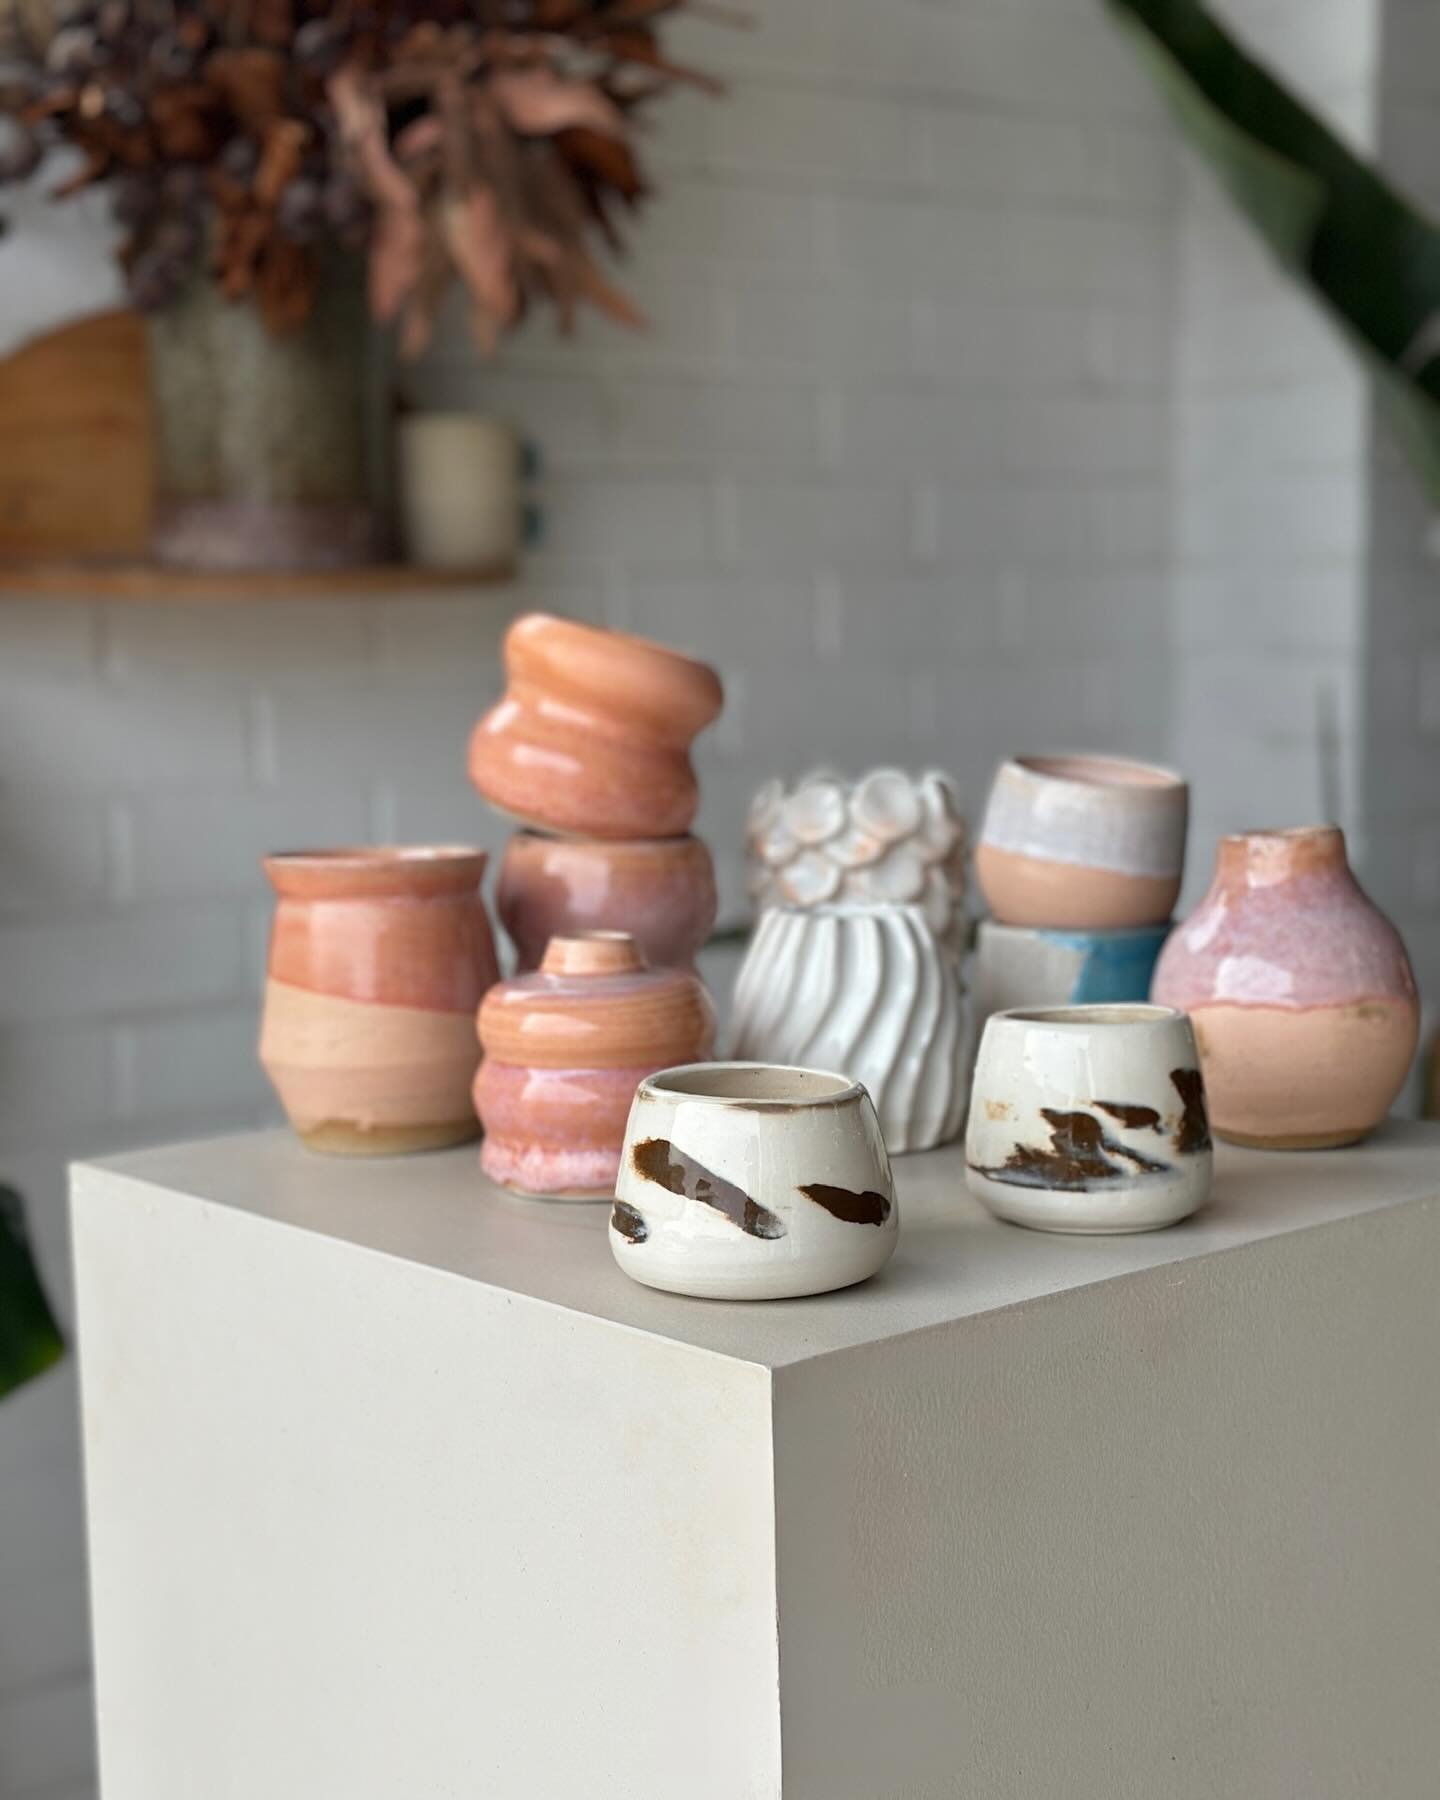 Weekend plans? @parttimeceramics renowned Ceramics Market is back this Sunday, May 5th, from 10am till 3pm. Here&rsquo;s the scoop:

💫 Shop unique, handmade pottery
🤍 Catch live wheel-throwing demos
🎨 Paint a mug (must pre-book &mdash; linked in b